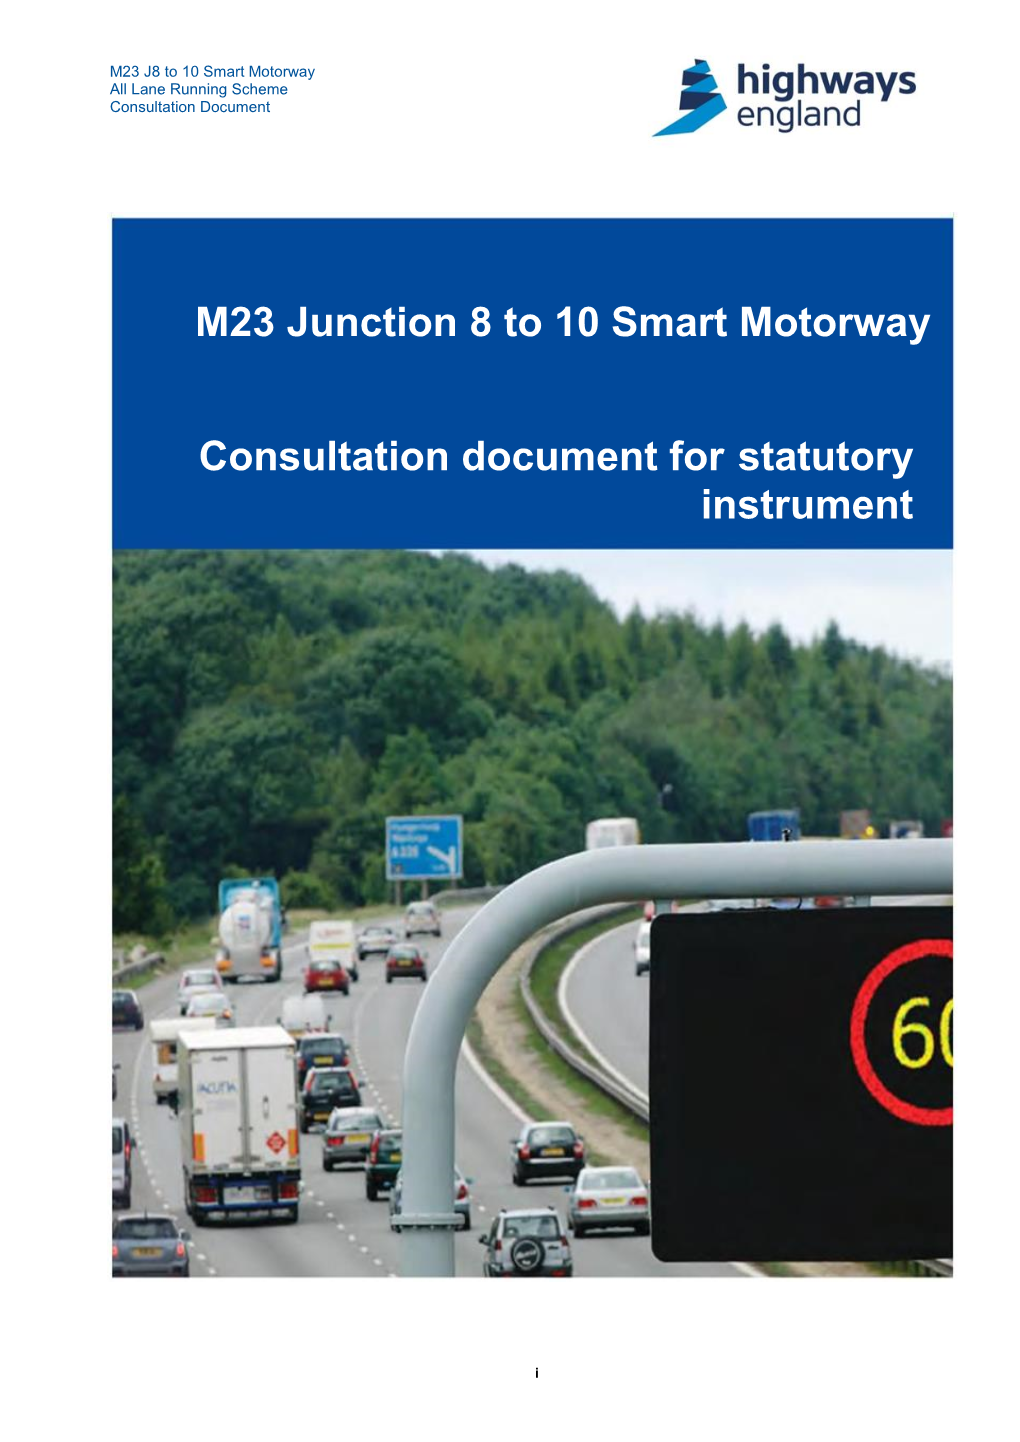 Consultation Document for Statutory Instrument M23 Junction 8 to 10